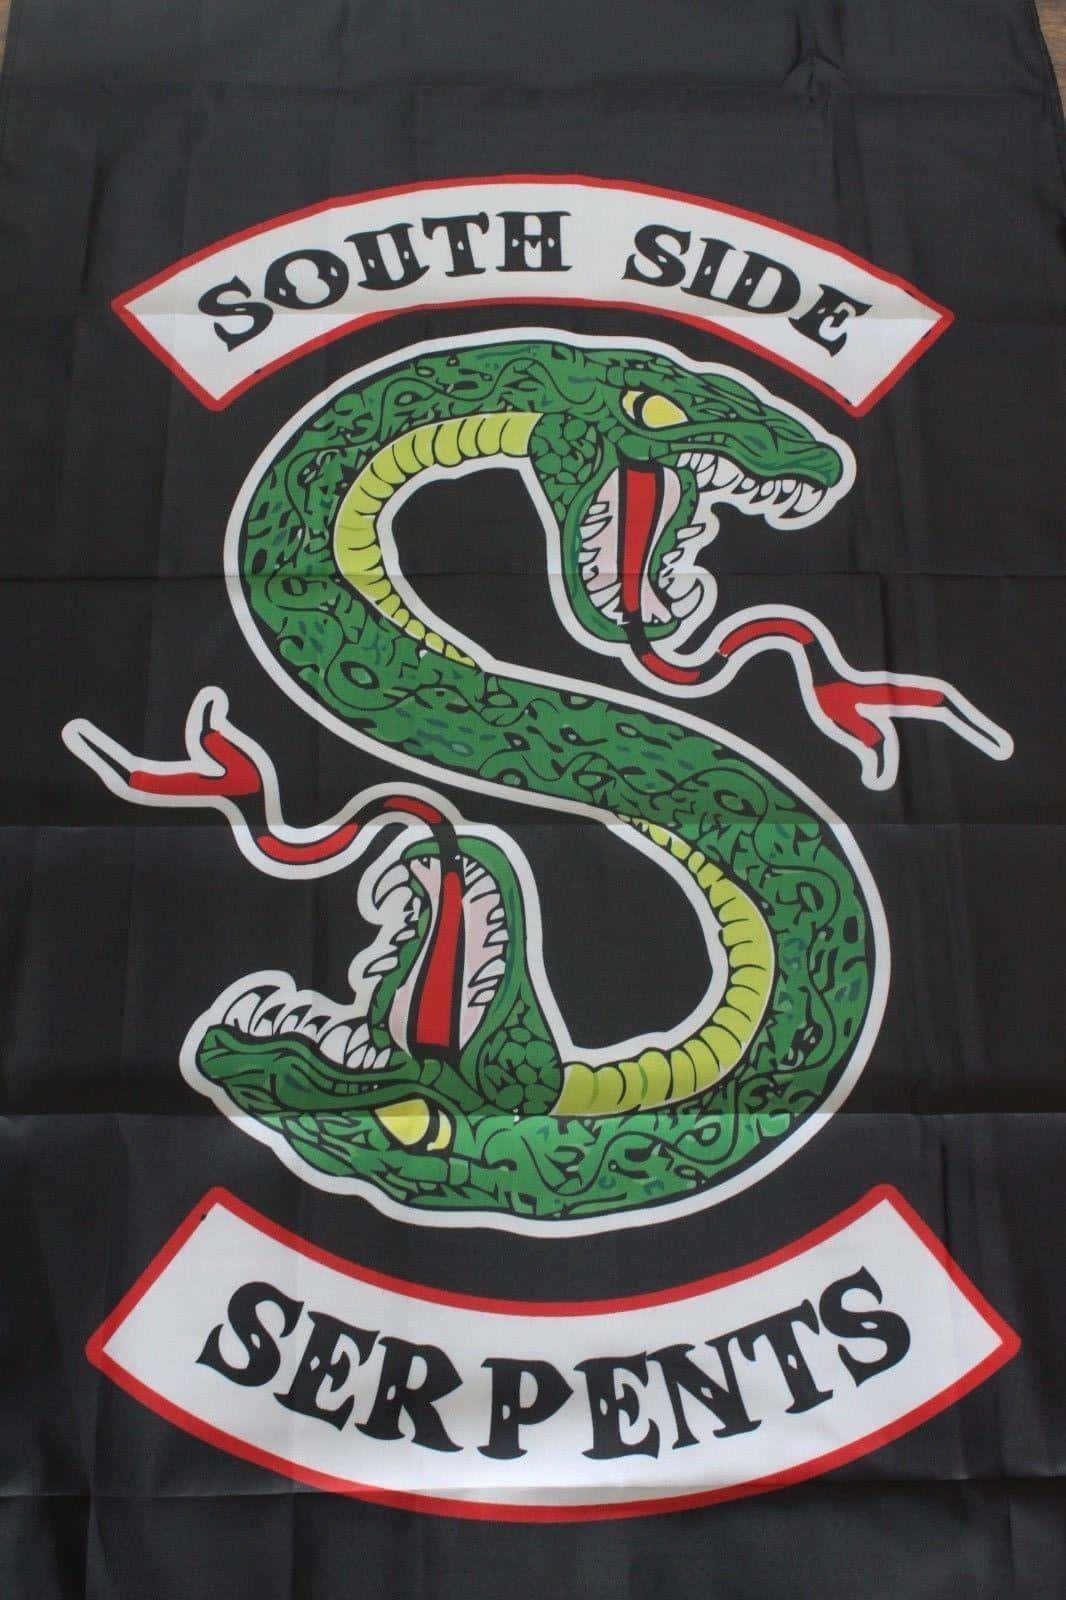 The Southside Serpents, a gang of fearless troublemakers. Wallpaper